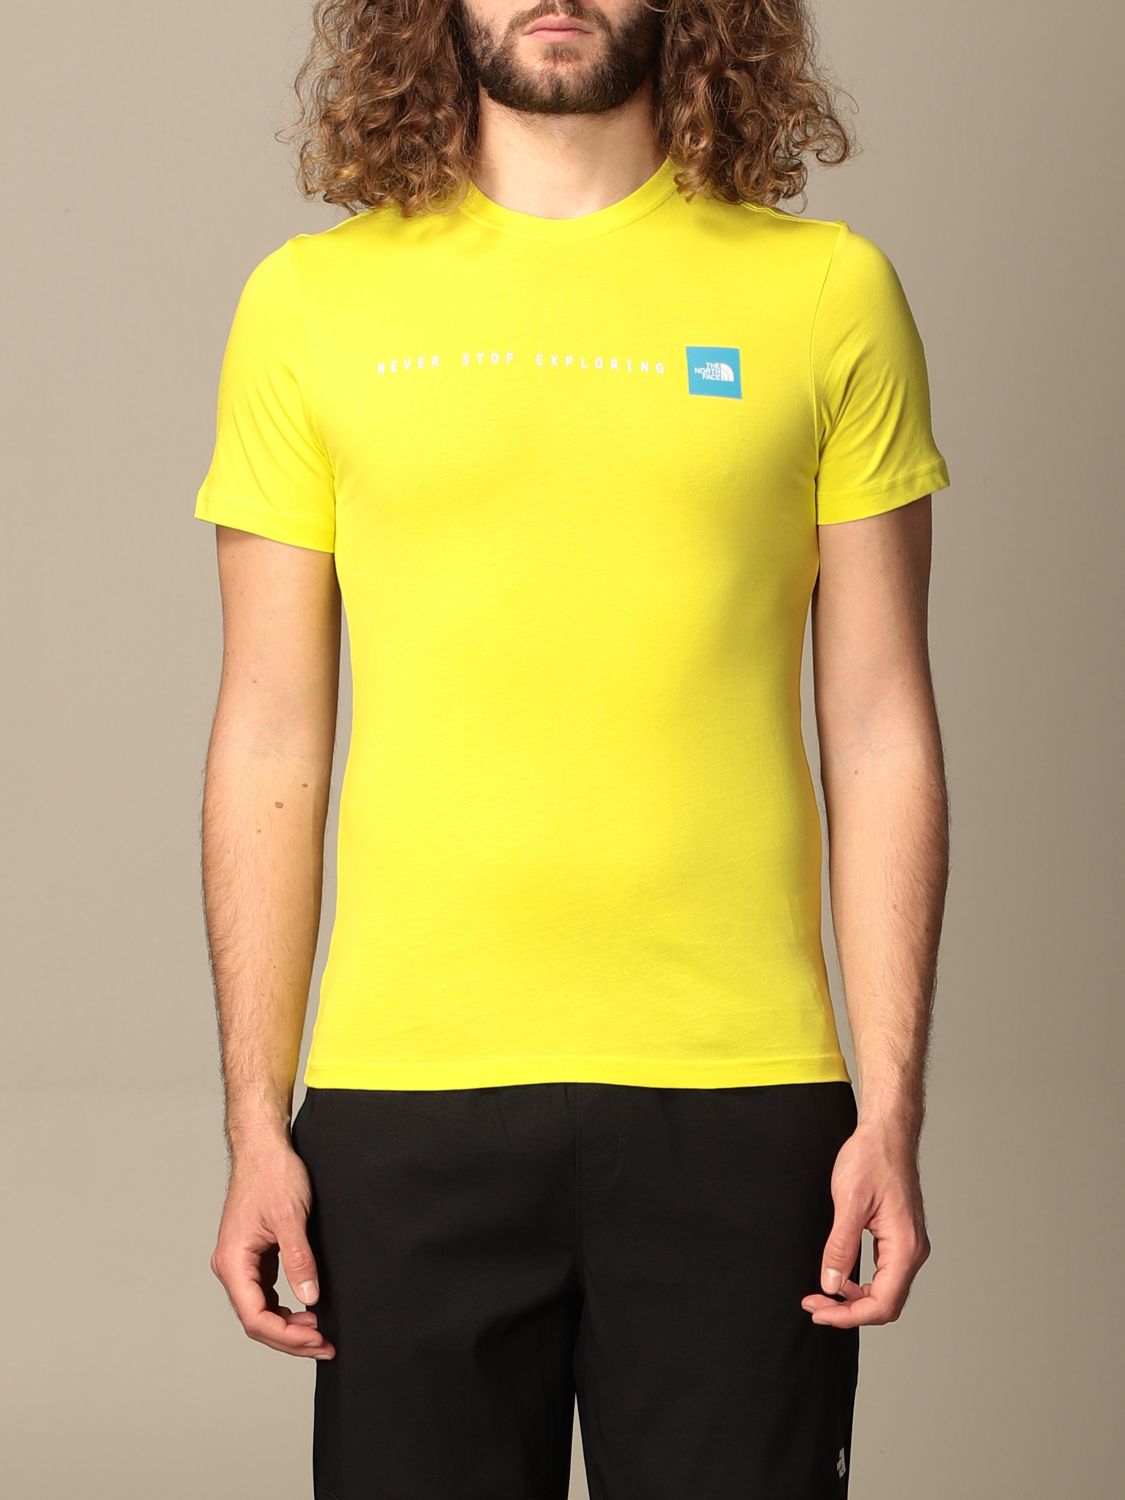 yellow north face top